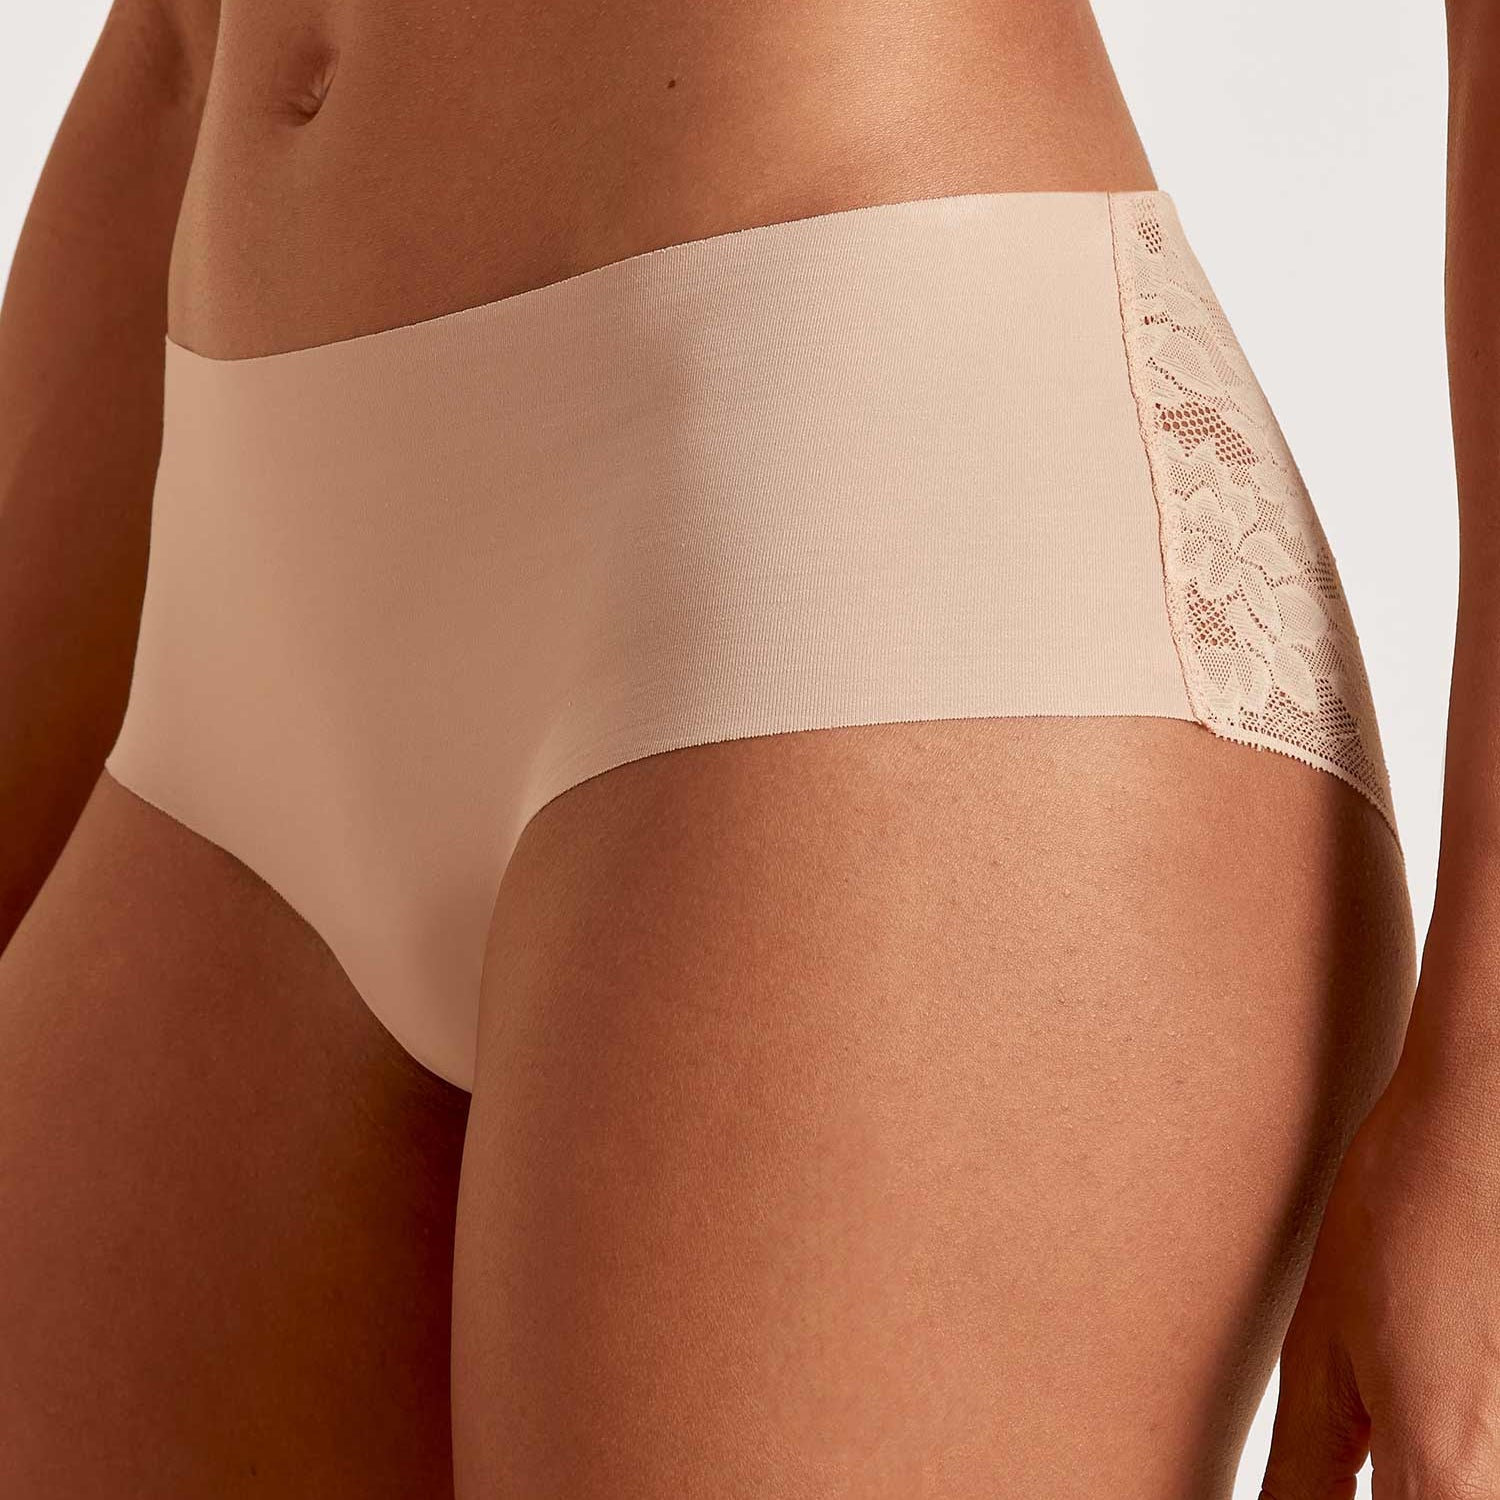 Panty, low cut (Hipster), NATURAL SKIN LACE